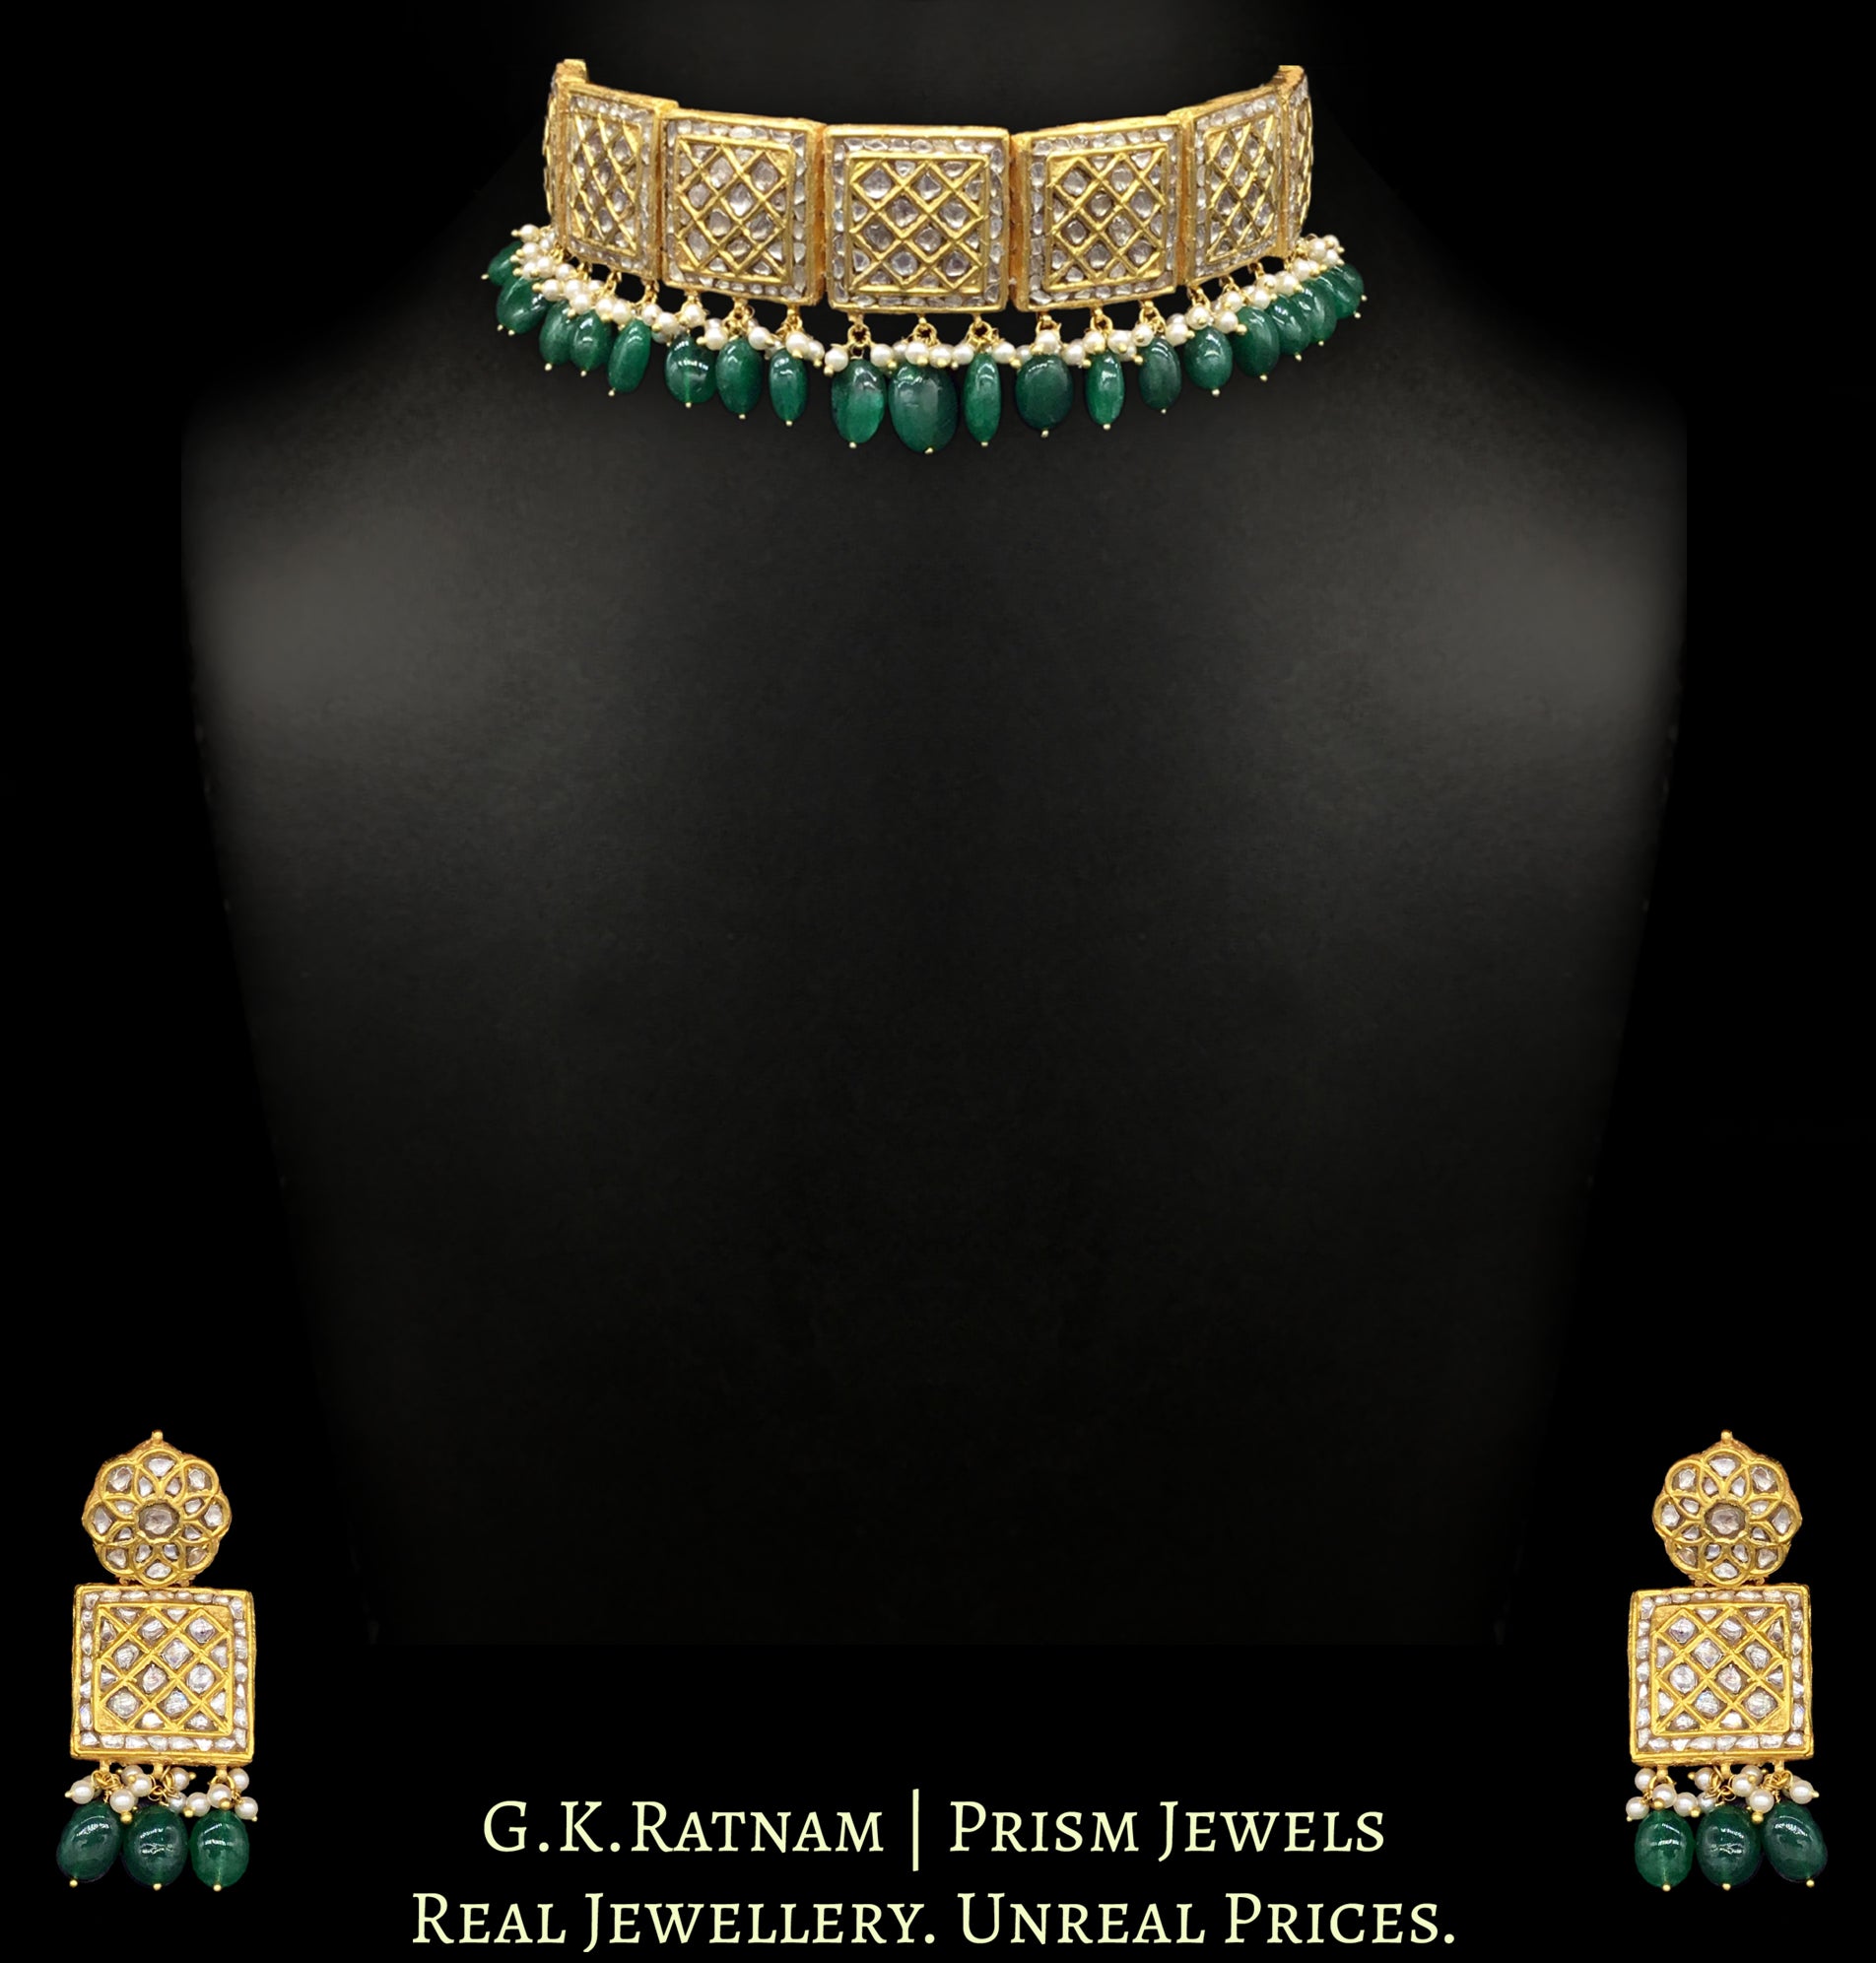 23k Gold and Diamond Polki Choker Necklace Set with green beryls and lustrous shell pearls